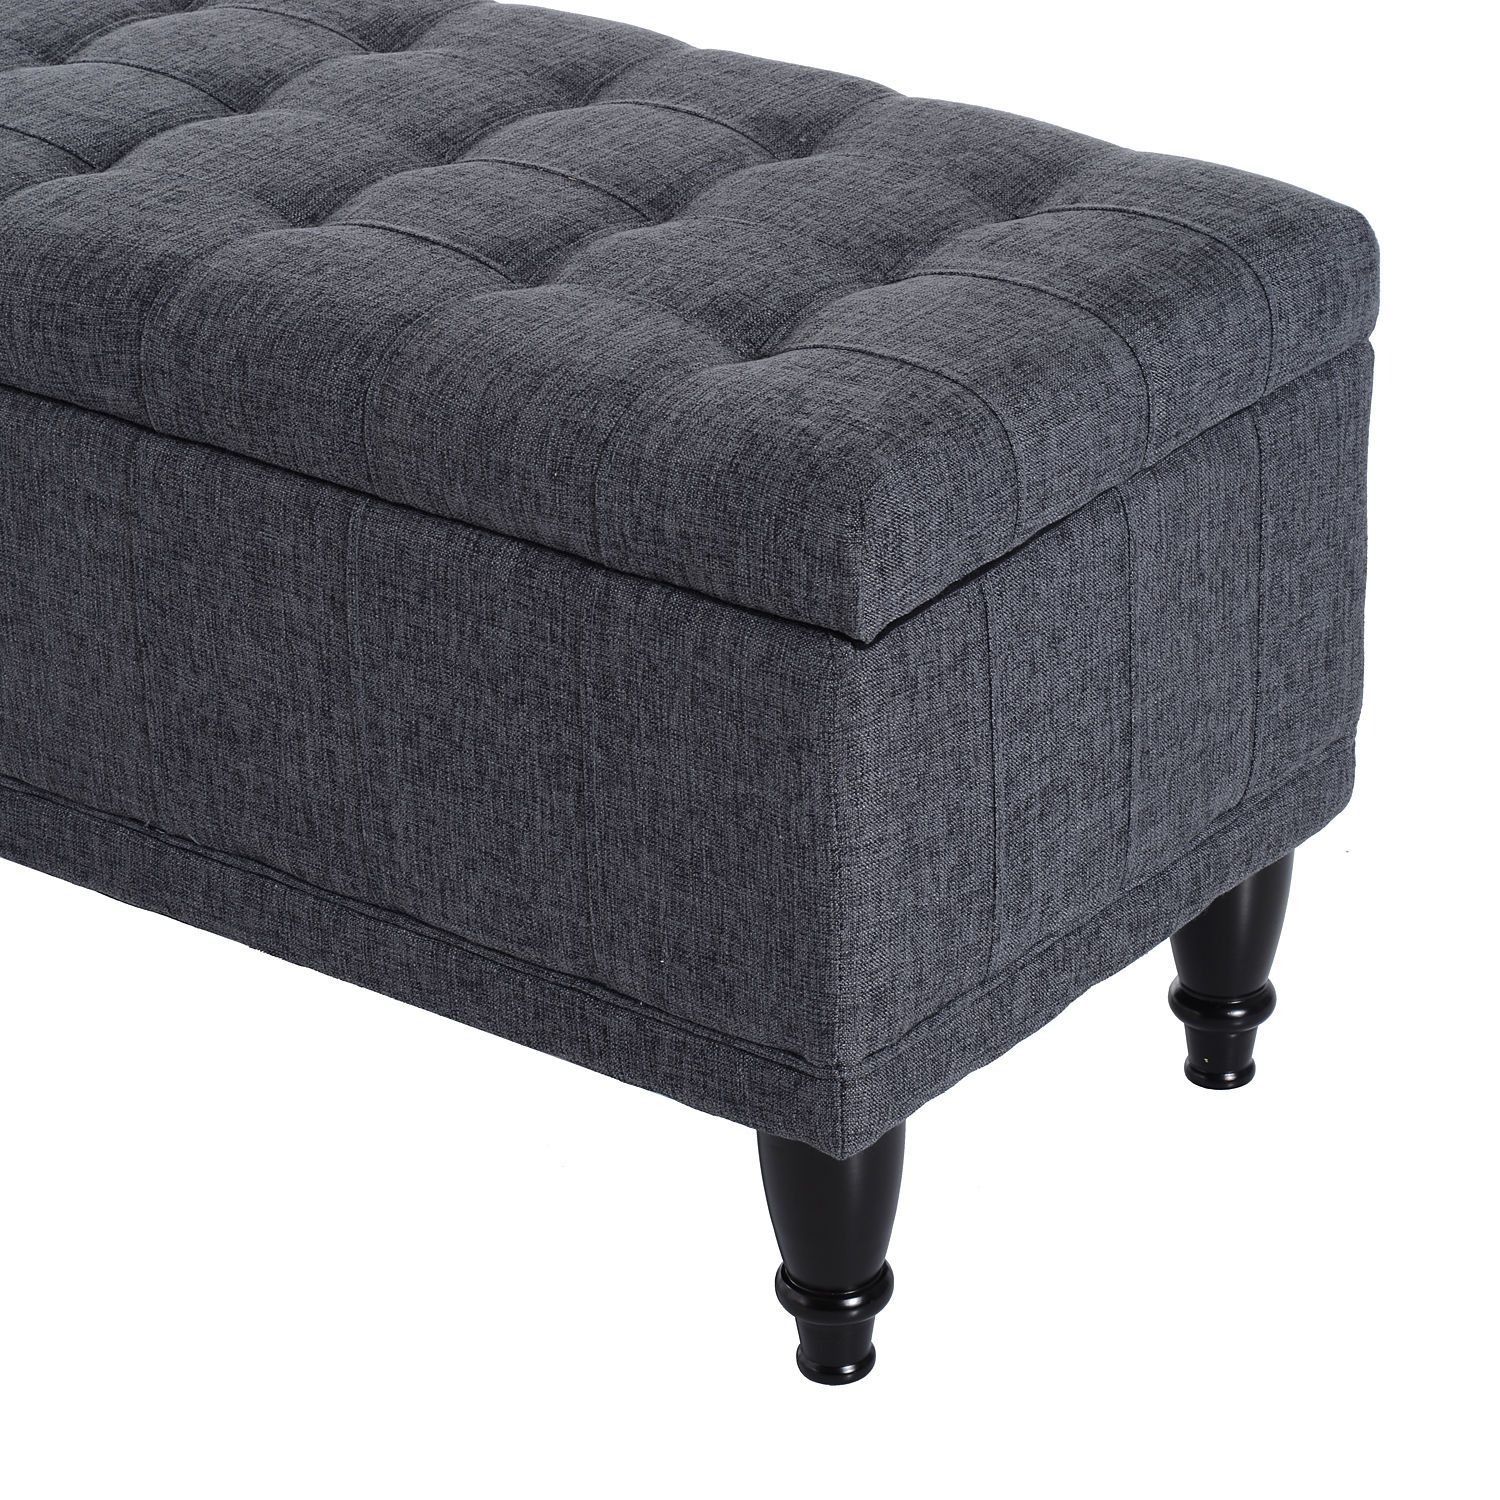 42" Lift Top Storage Ottoman Tufted Fabric Shoe Bench Footrest Stool Within Charcoal Fabric Tufted Storage Ottomans (View 12 of 20)